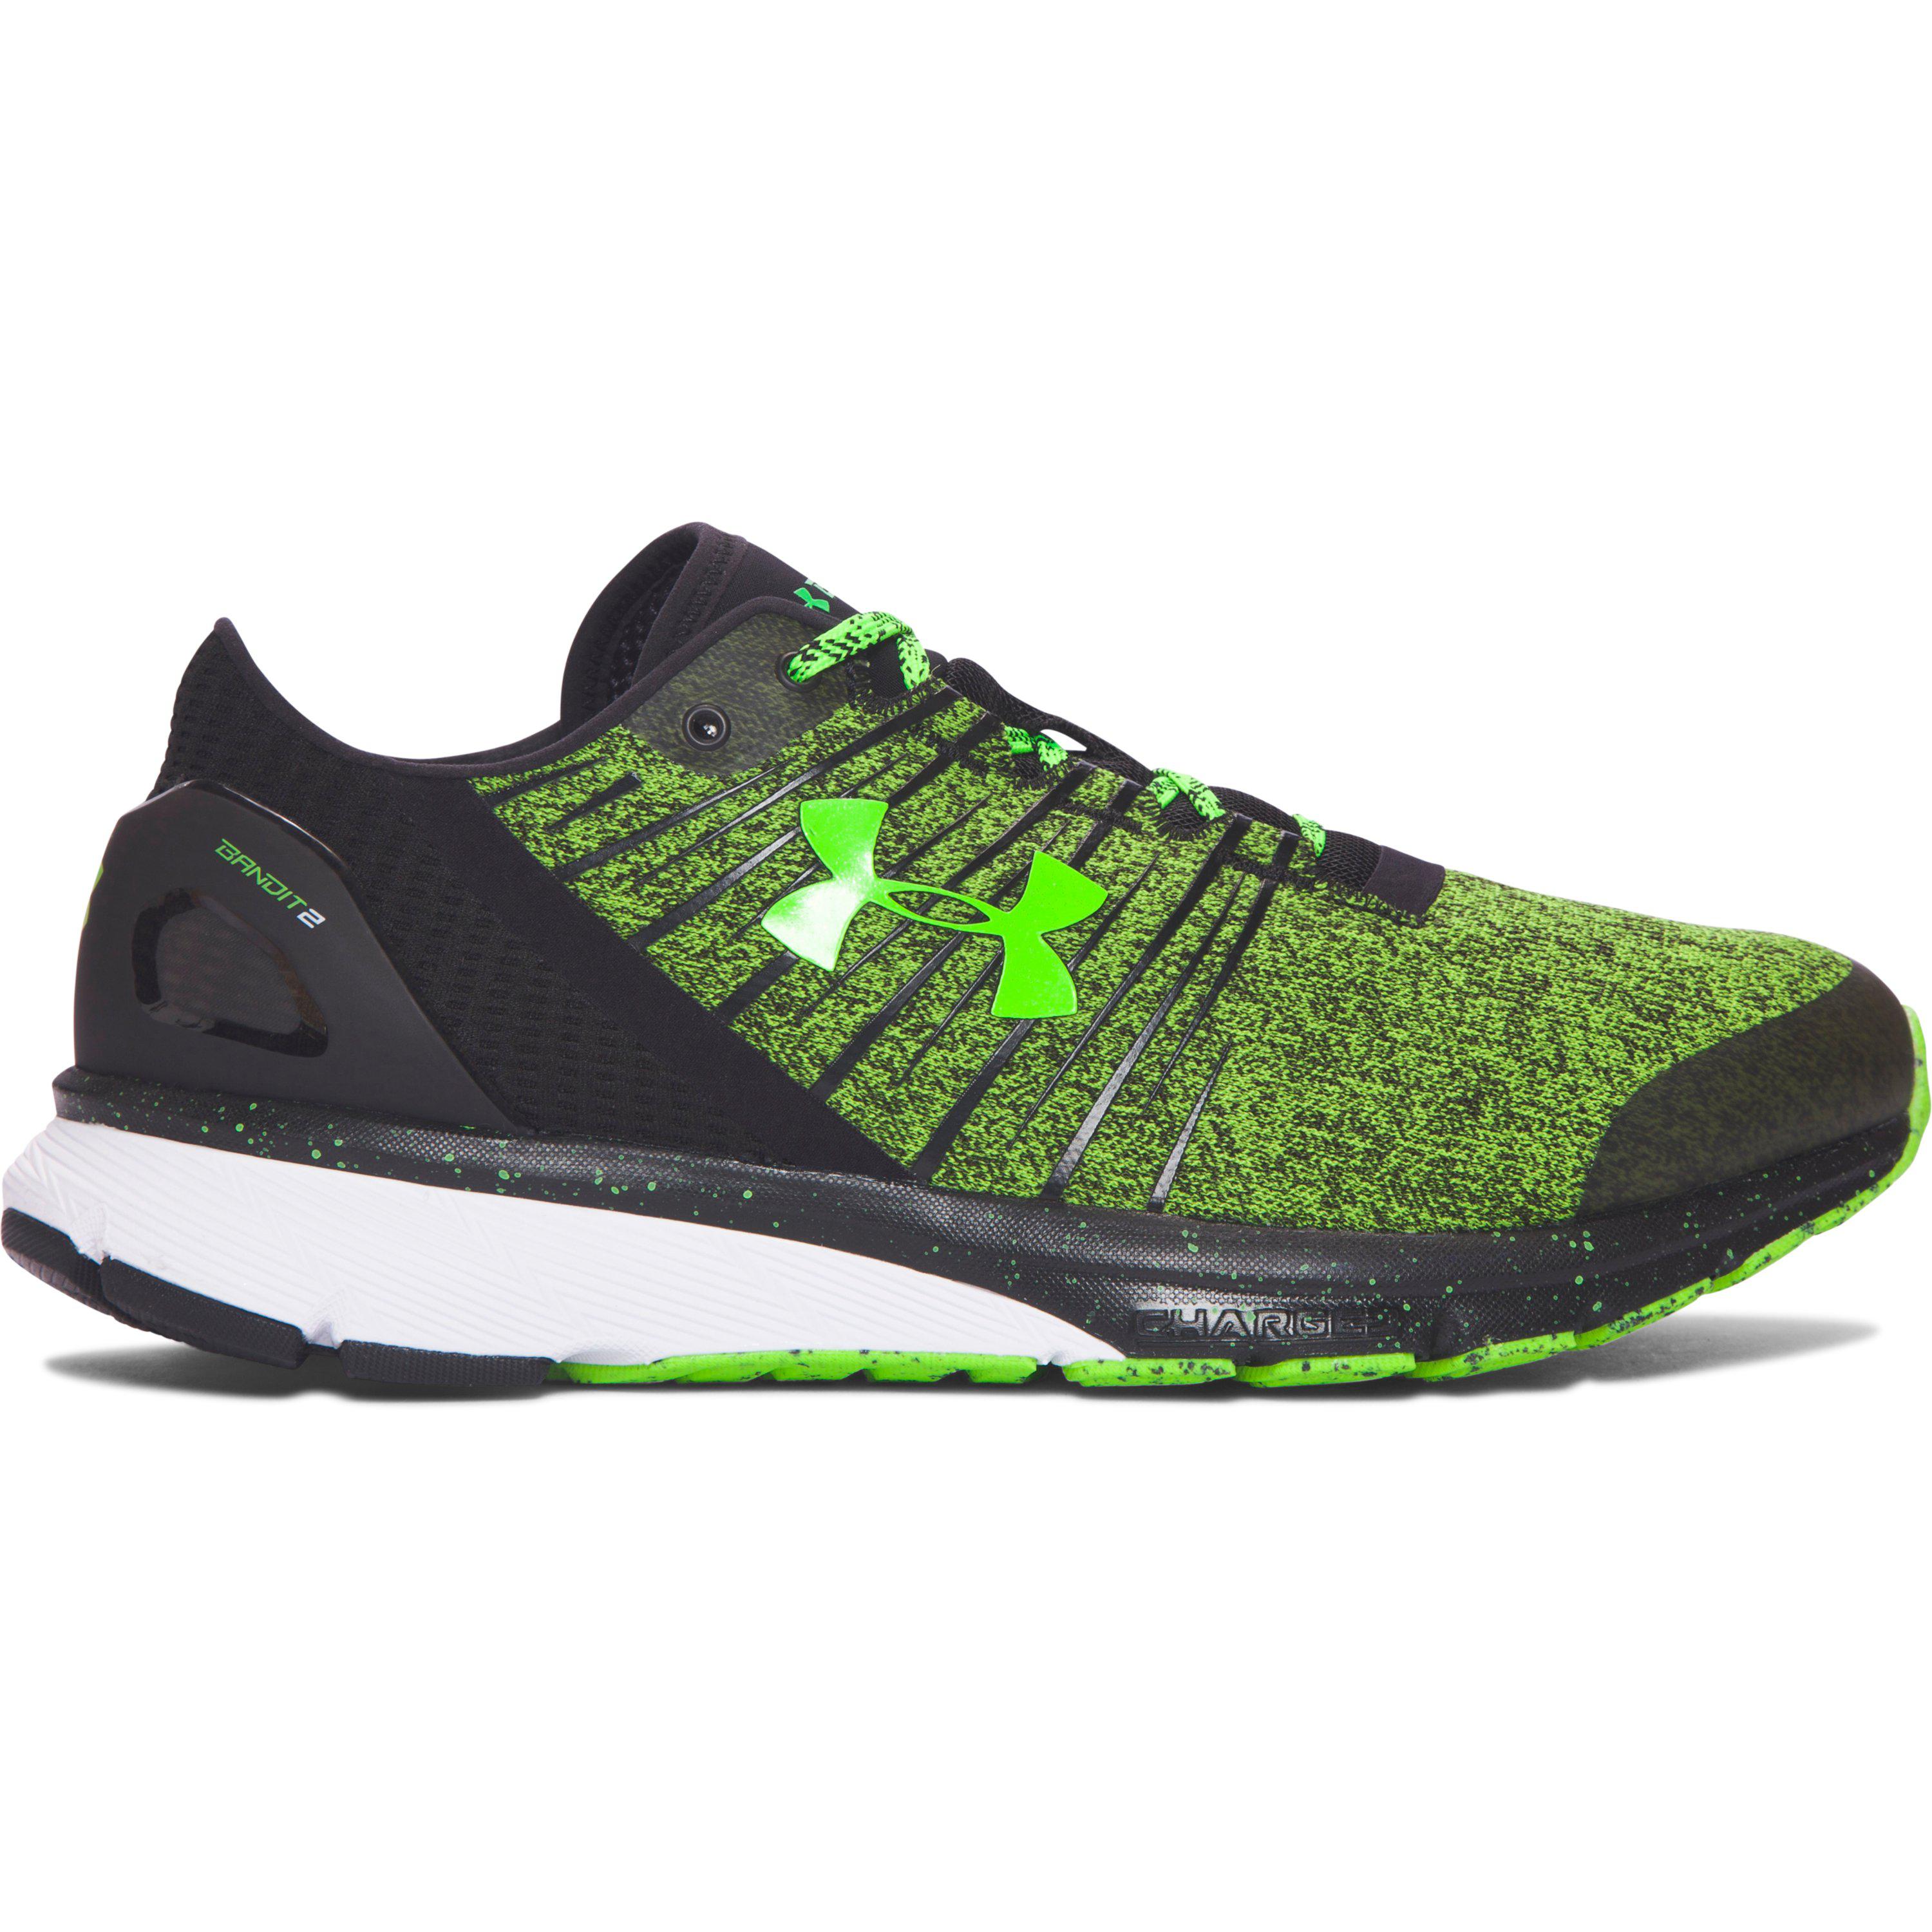 Under Armour Rubber Men's Ua Charged Bandit 2 Running Shoes in Green ...